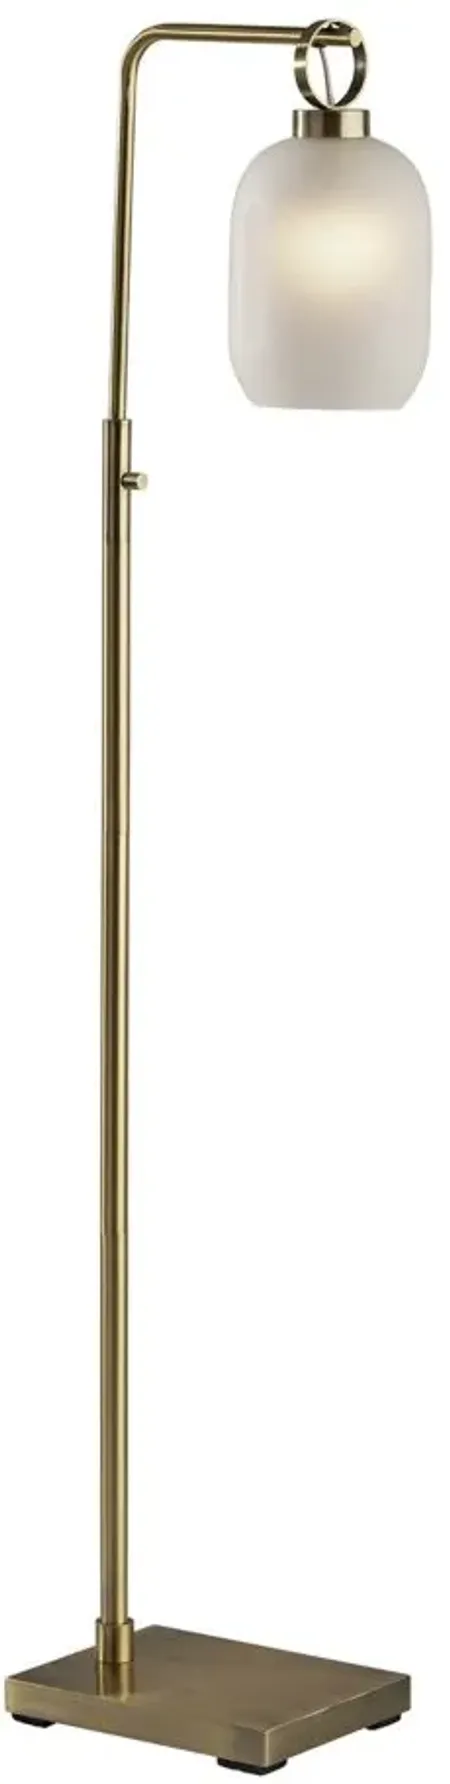 Lancaster Brass Floor Lamp in Antique Brass by Adesso Inc